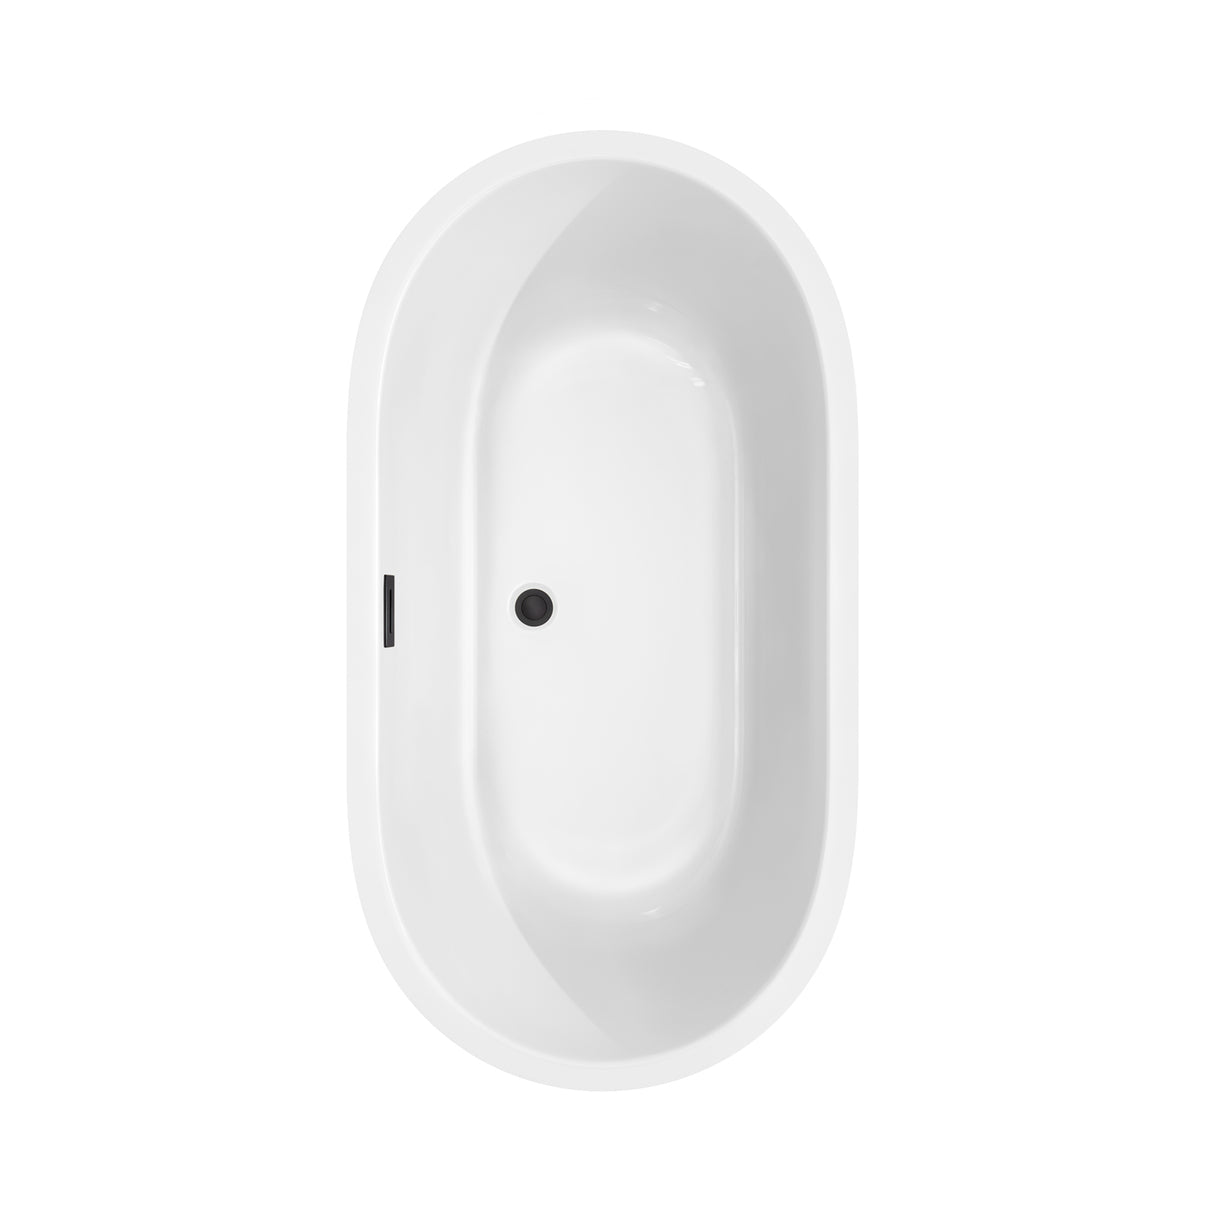 Juliette 60 Inch Freestanding Bathtub in White with Floor Mounted Faucet Drain and Overflow Trim in Matte Black